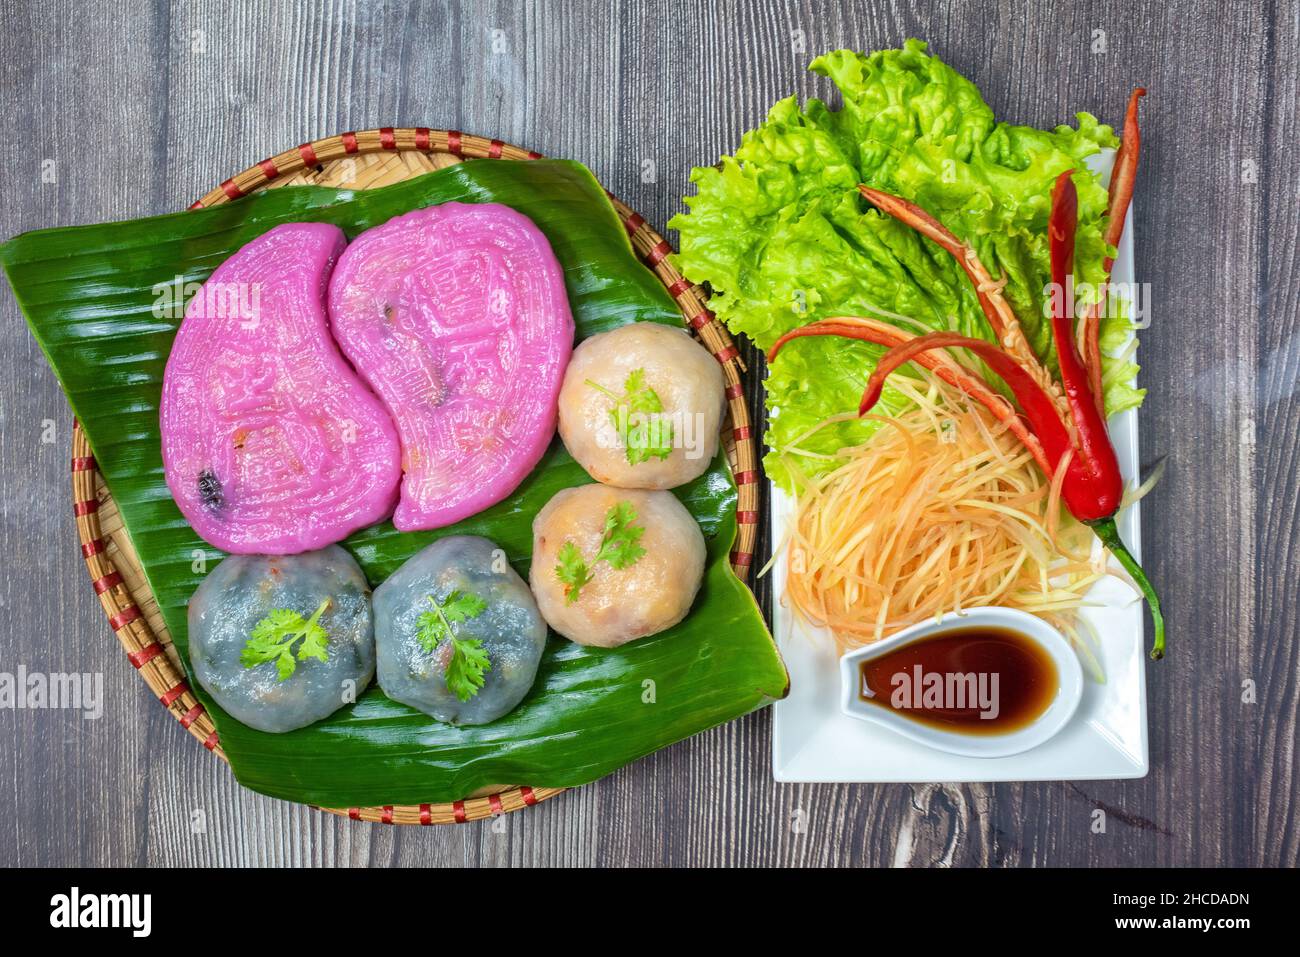 Willow cake ( Banh La Lieu) is a Vietnamese snack with ingredients including glutinous rice, dried shrimp, shiitake mushrooms, papaya salad and dipped Stock Photo